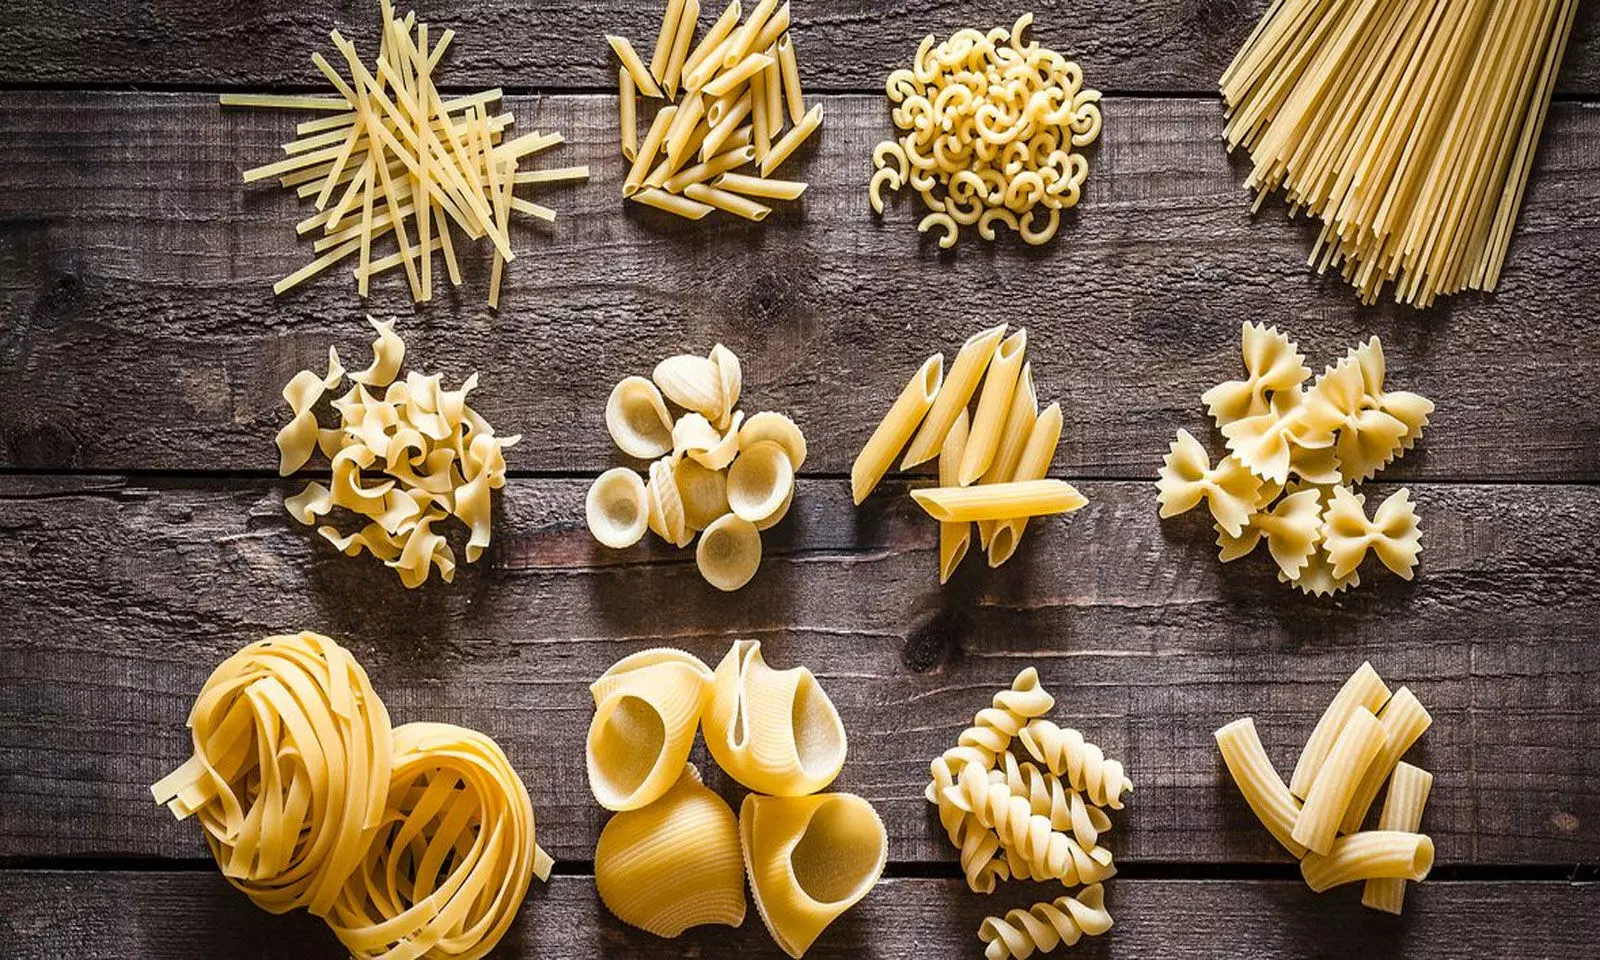 Pasta a healthy food option for weight loss in females, finds study